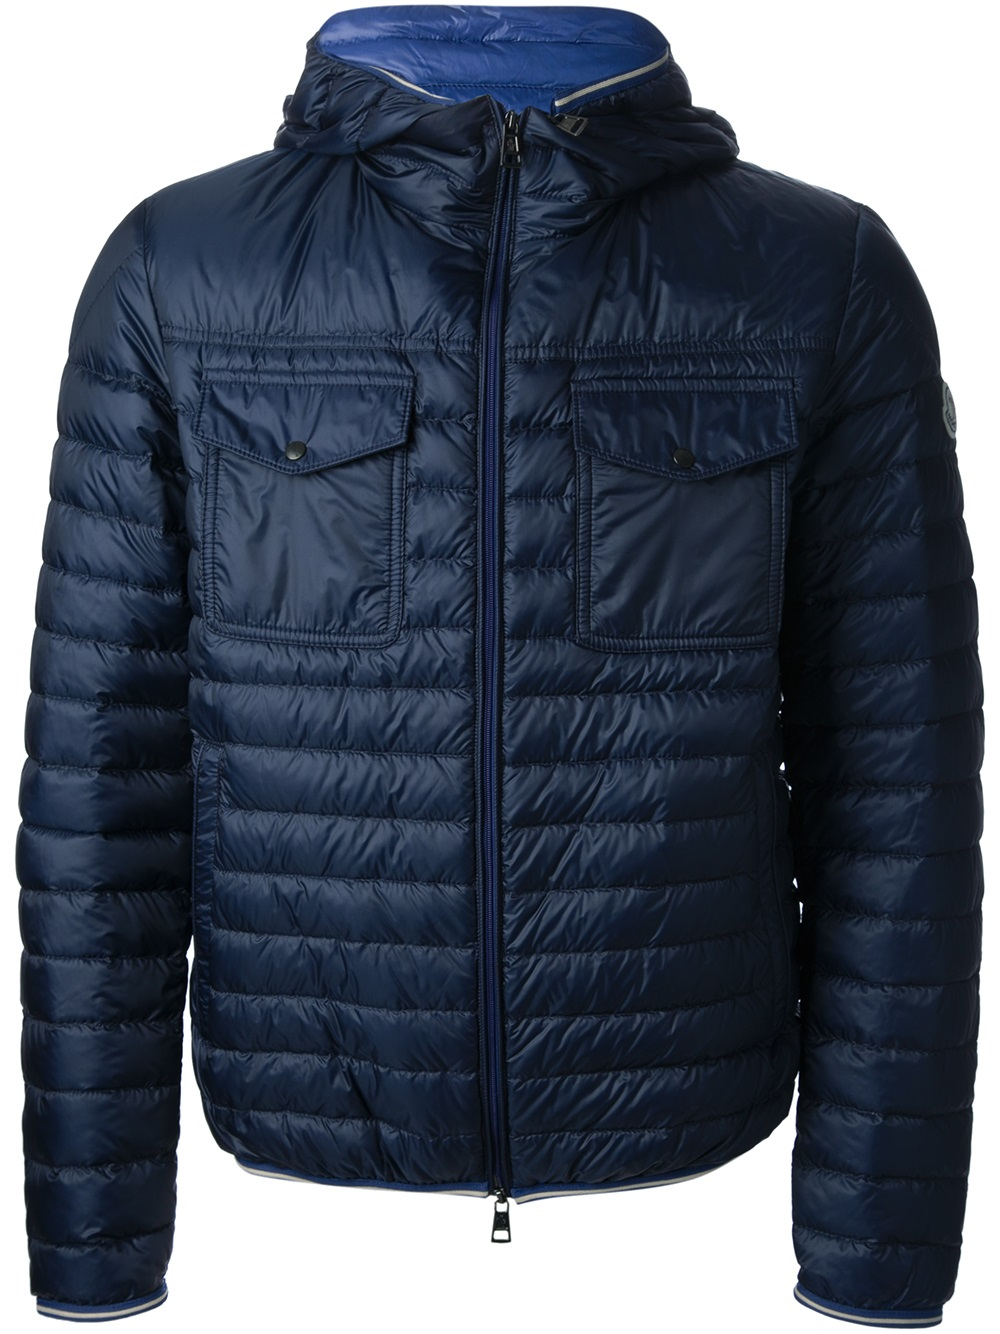 Lyst - Moncler Clovis Feather Down Jacket in Blue for Men